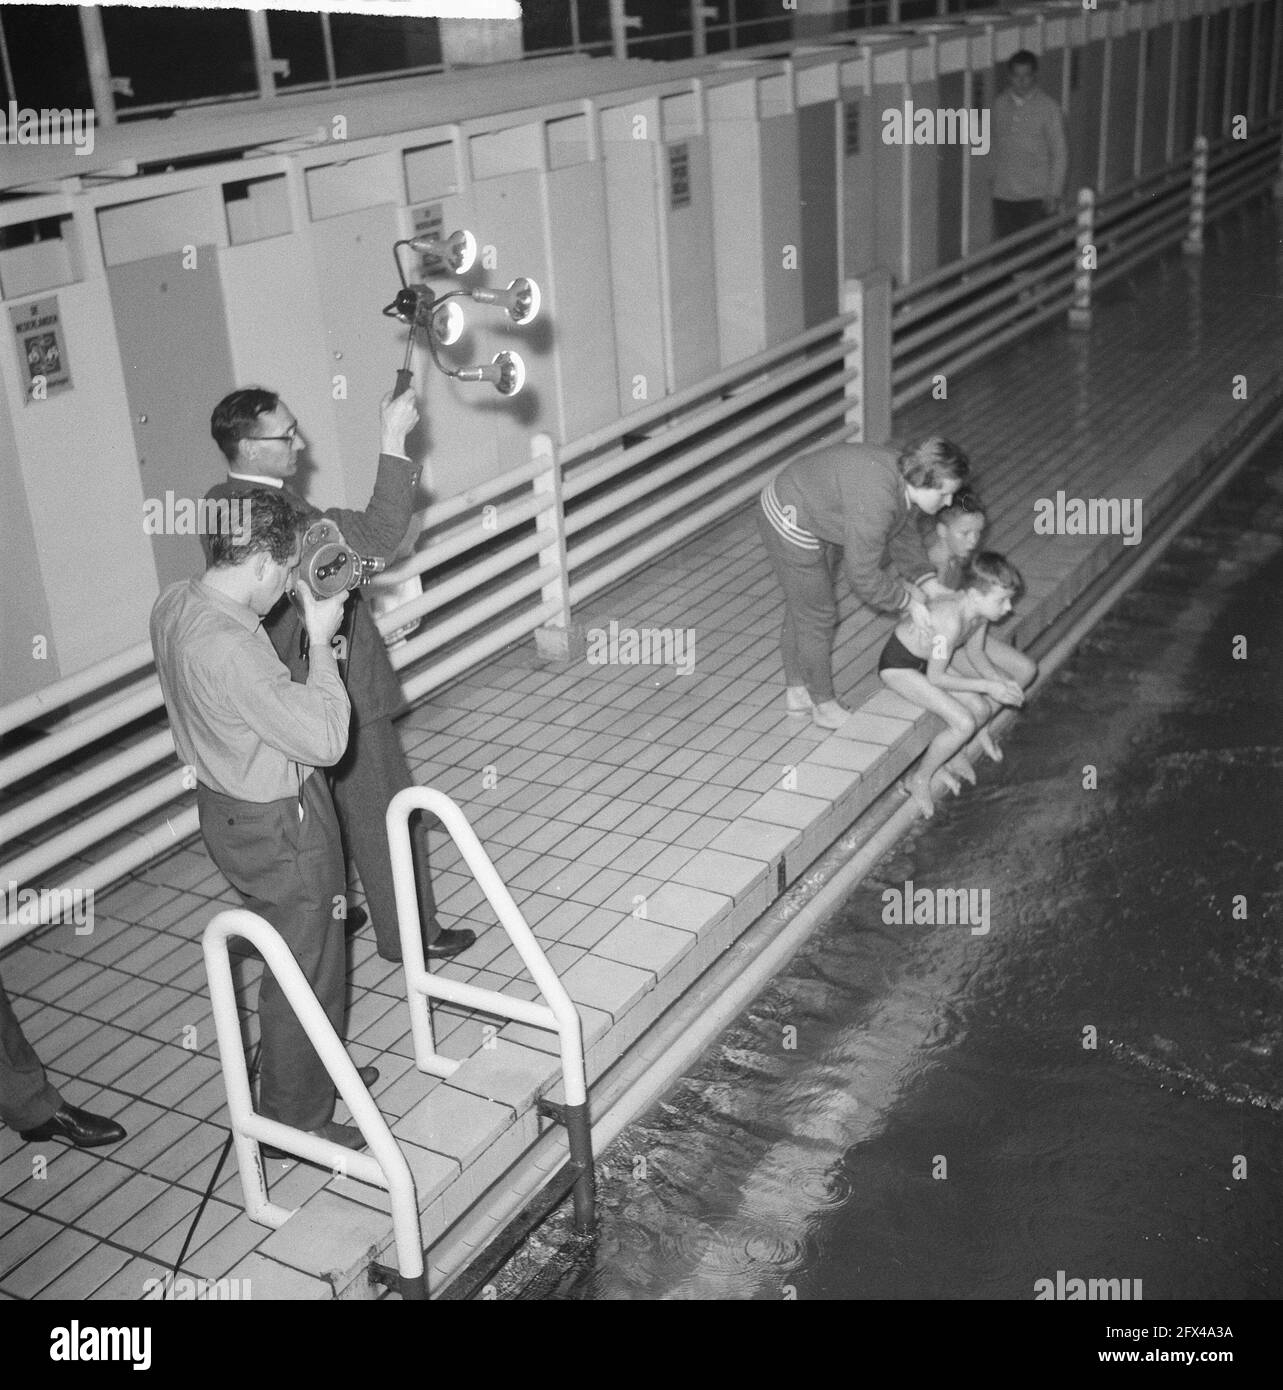 Shooting in the swimming stadium in Naarden for Eurovision film, January 5, 1961, The Netherlands, 20th century press agency photo, news to remember, documentary, historic photography 1945-1990, visual stories, human history of the Twentieth Century, capturing moments in time Stock Photo